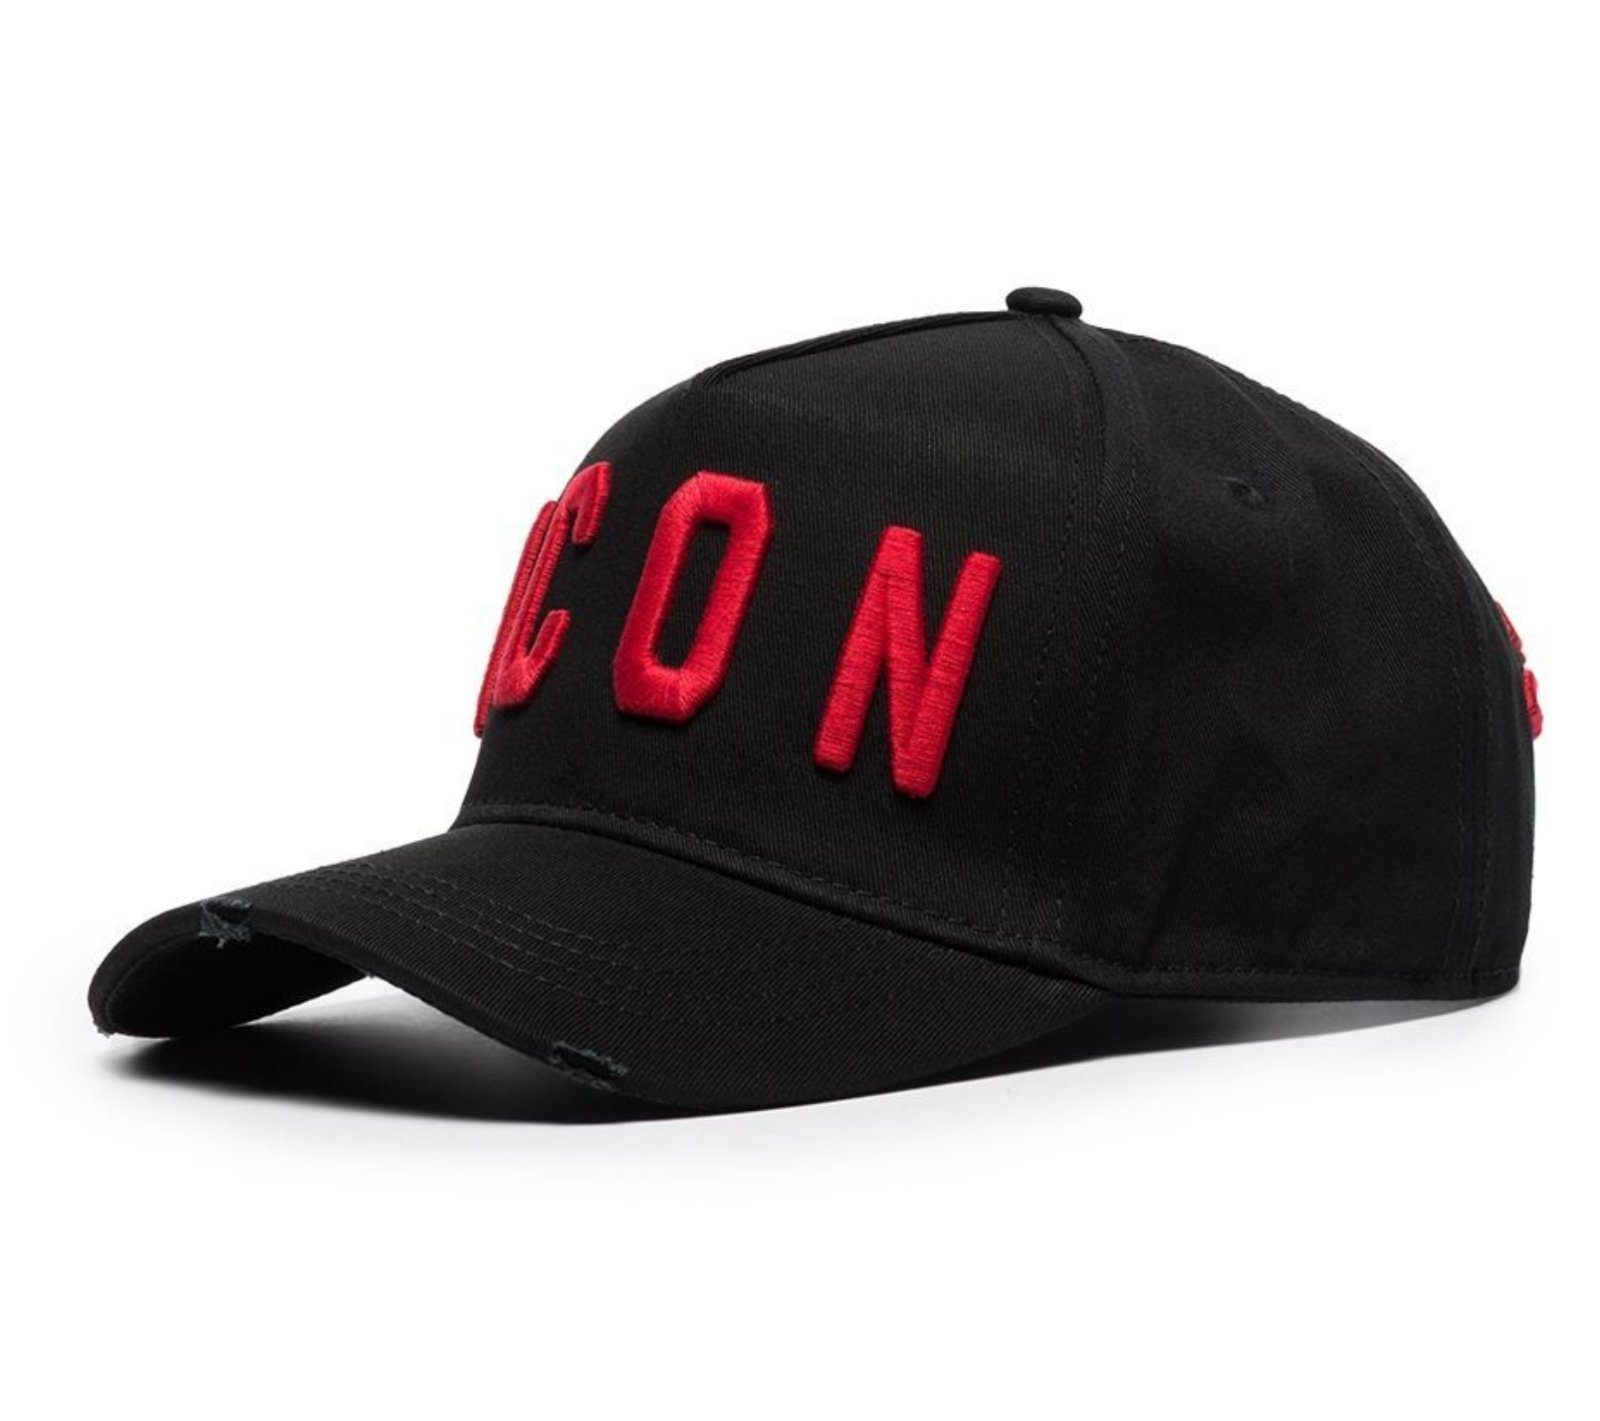 CAP VINTAGE HAT DSQUARED2 CAPPY Baseball ICON Cap LOGO Dsquared2 EMBROIDERED BLACK BASEBALL